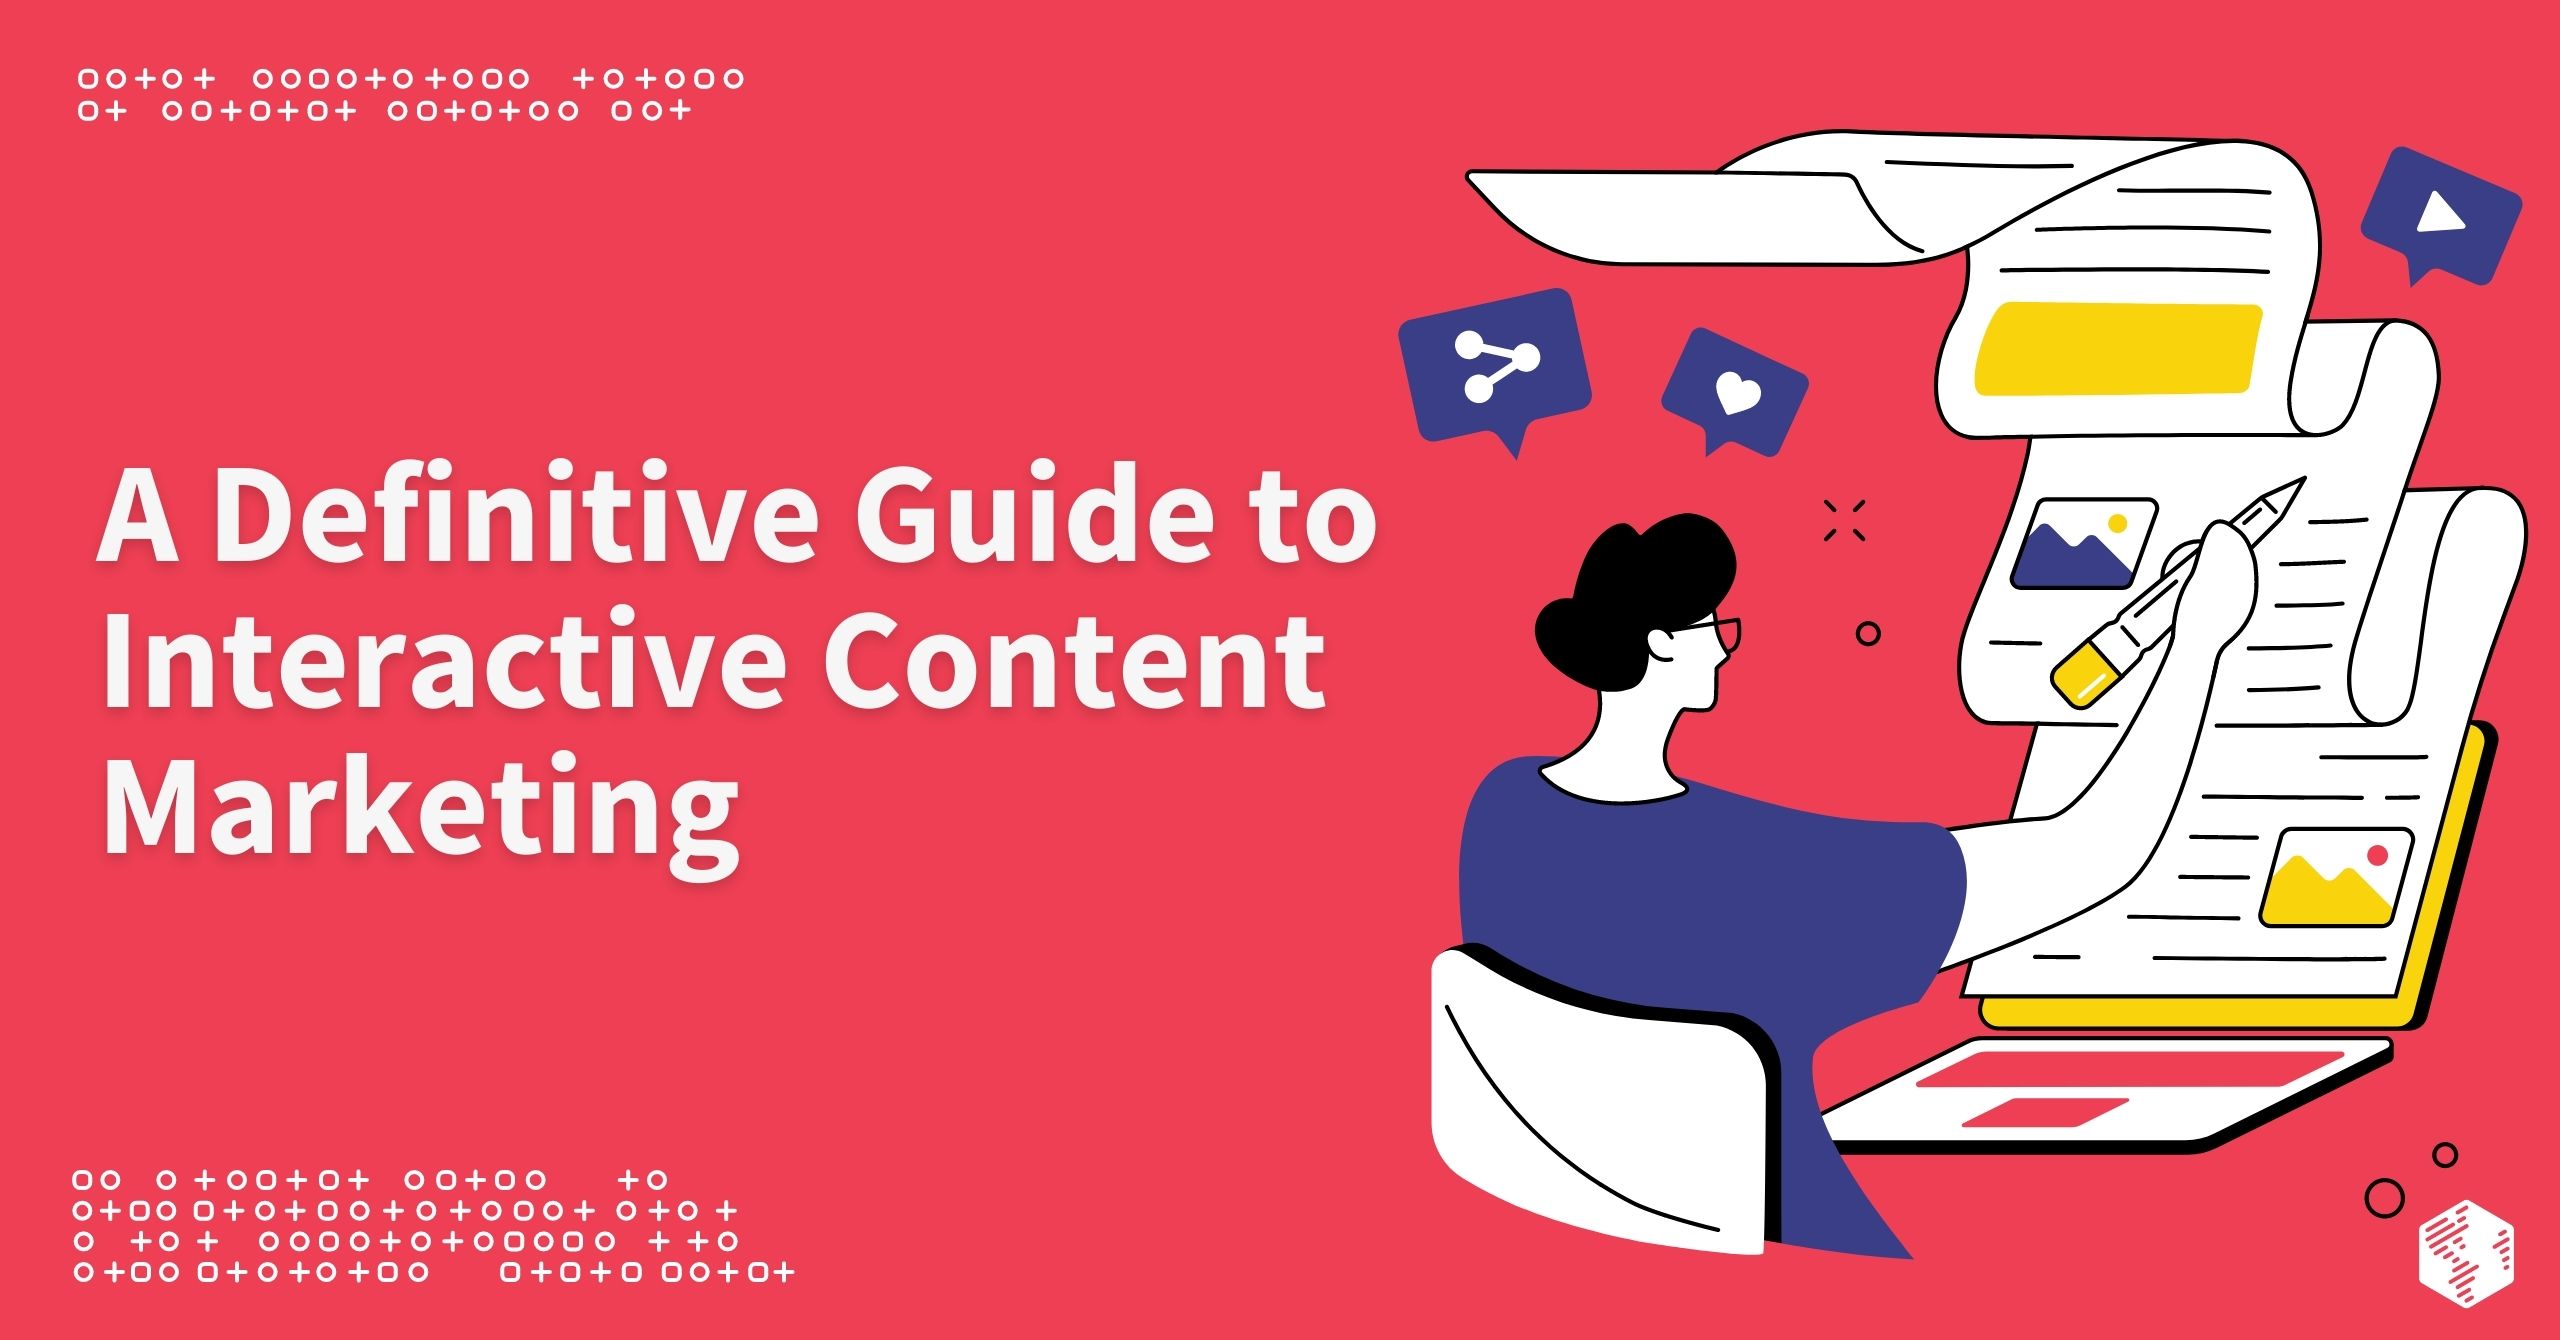 A Definitive Guide to Interactive Content Marketing